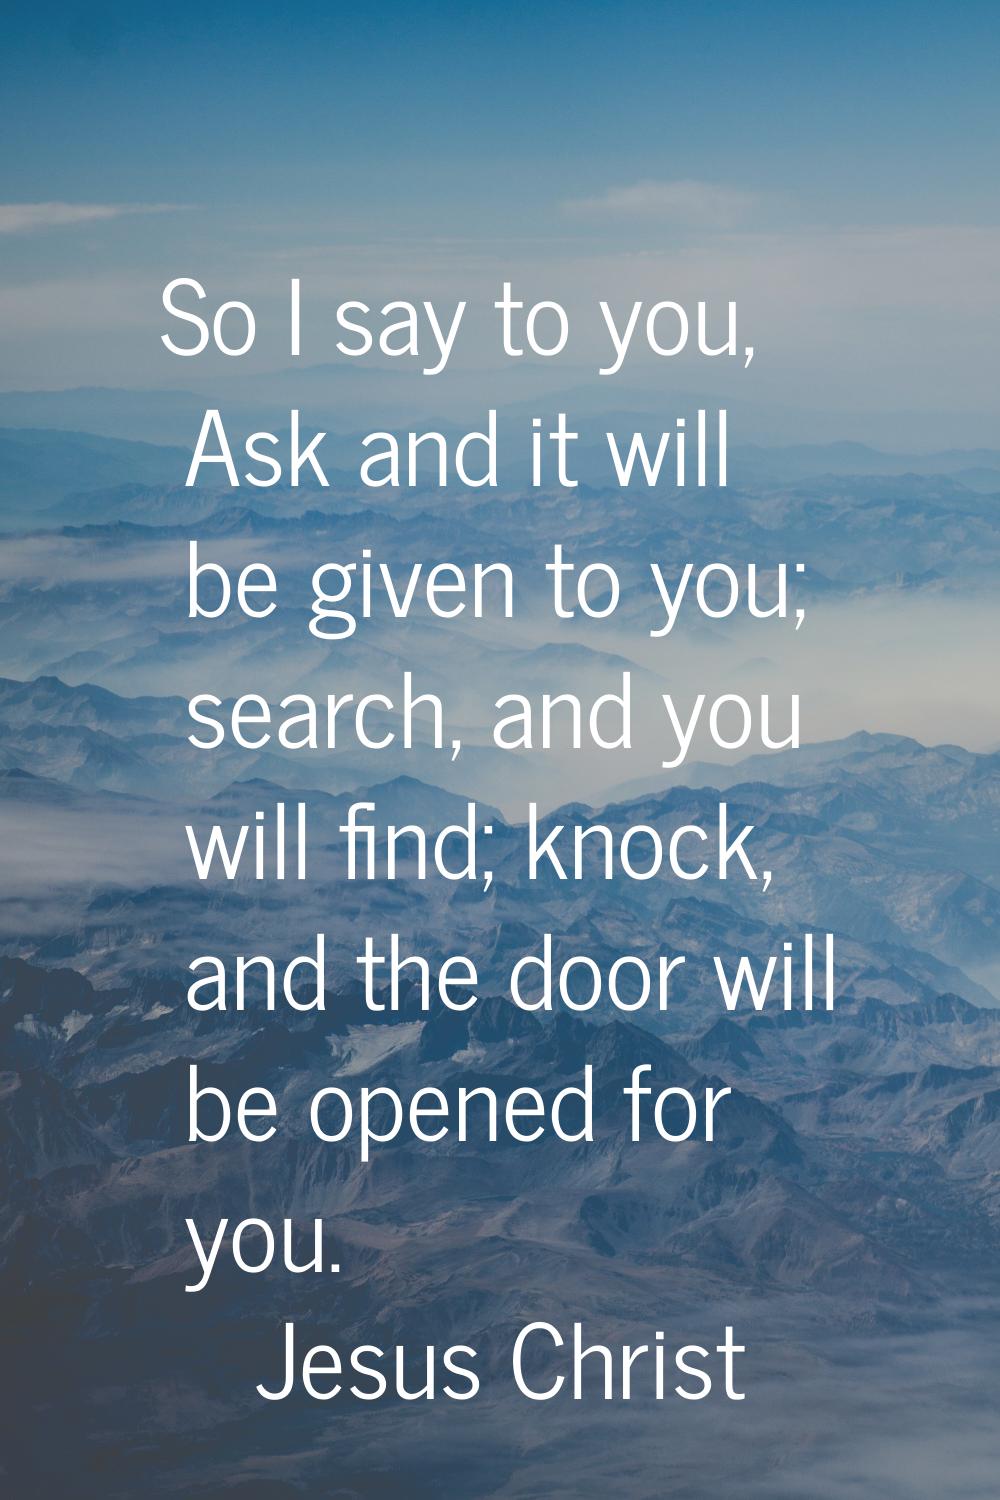 So I say to you, Ask and it will be given to you; search, and you will find; knock, and the door wi